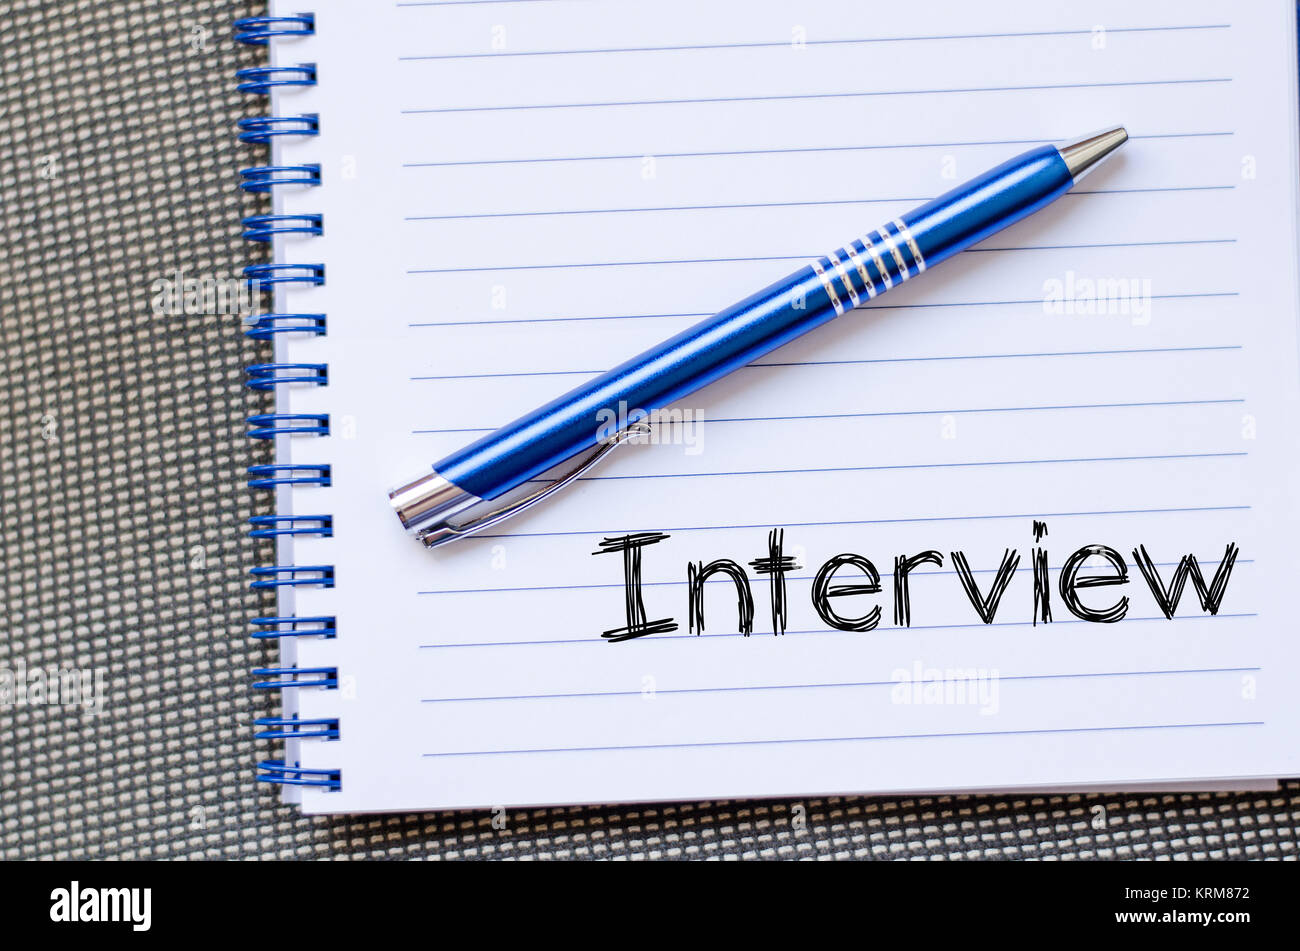 Interview text concept on notebook Stock Photo